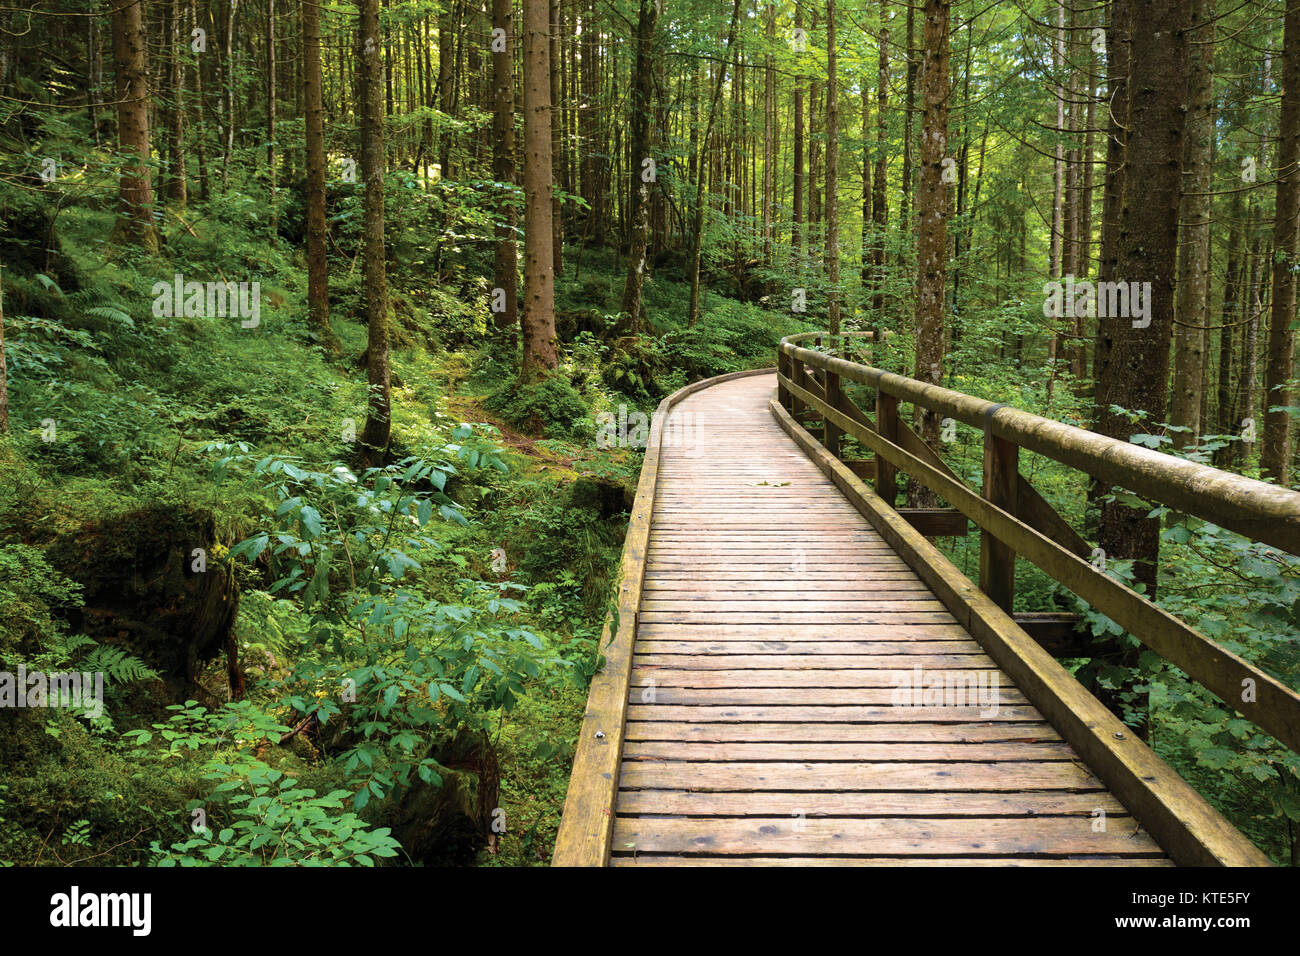 Fenced wooden pathway in alpine forest near Berchtesgaden in Germany Stock Photo